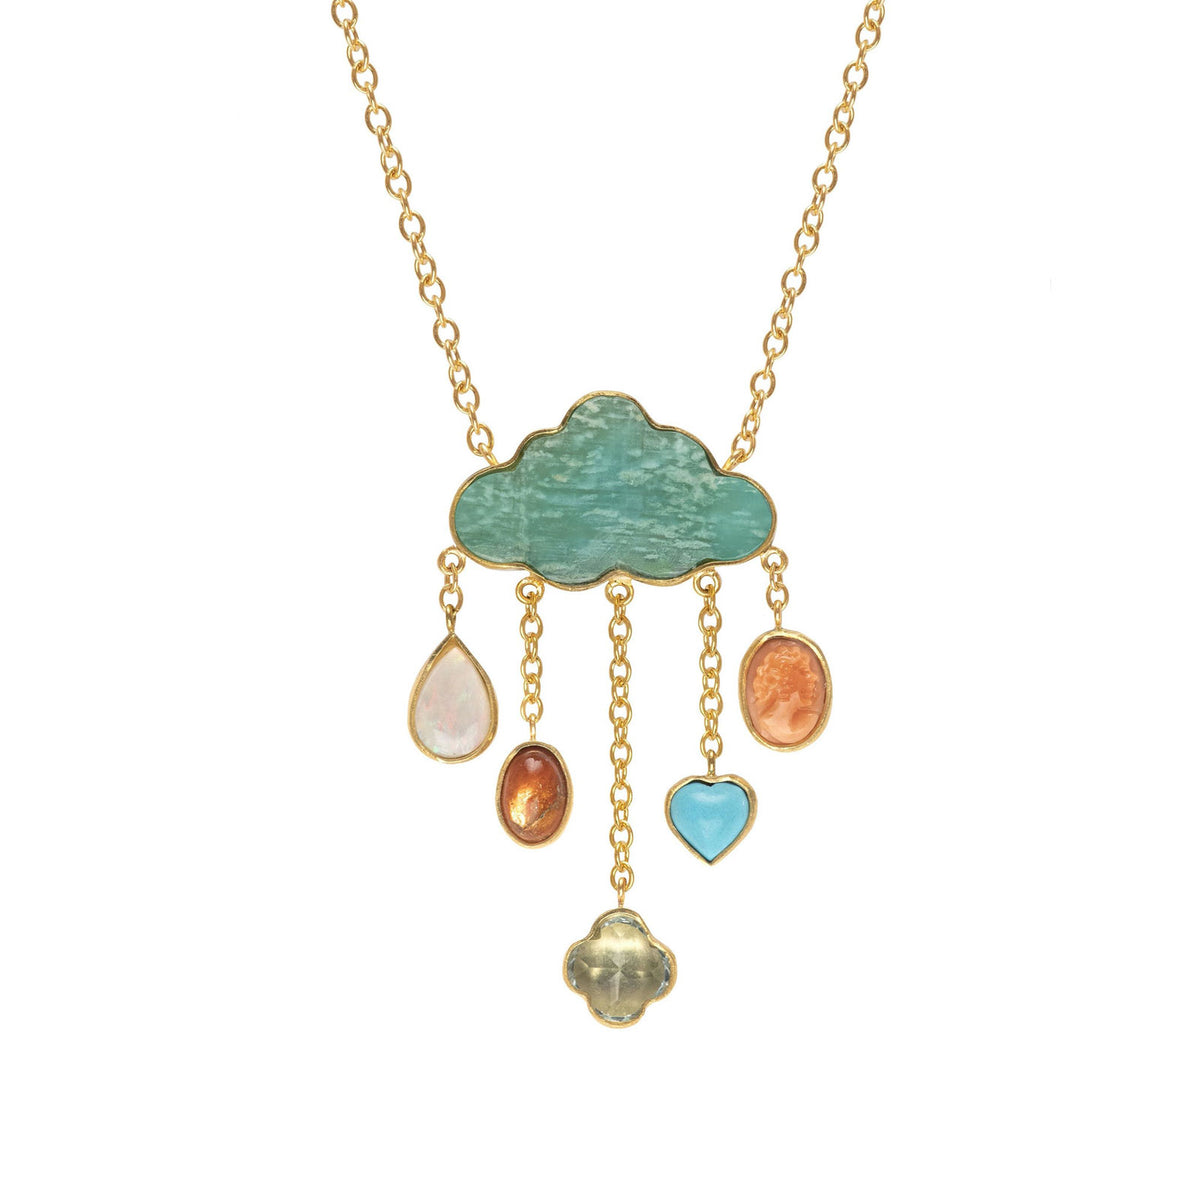 Close-up of cloud pendant with stones.